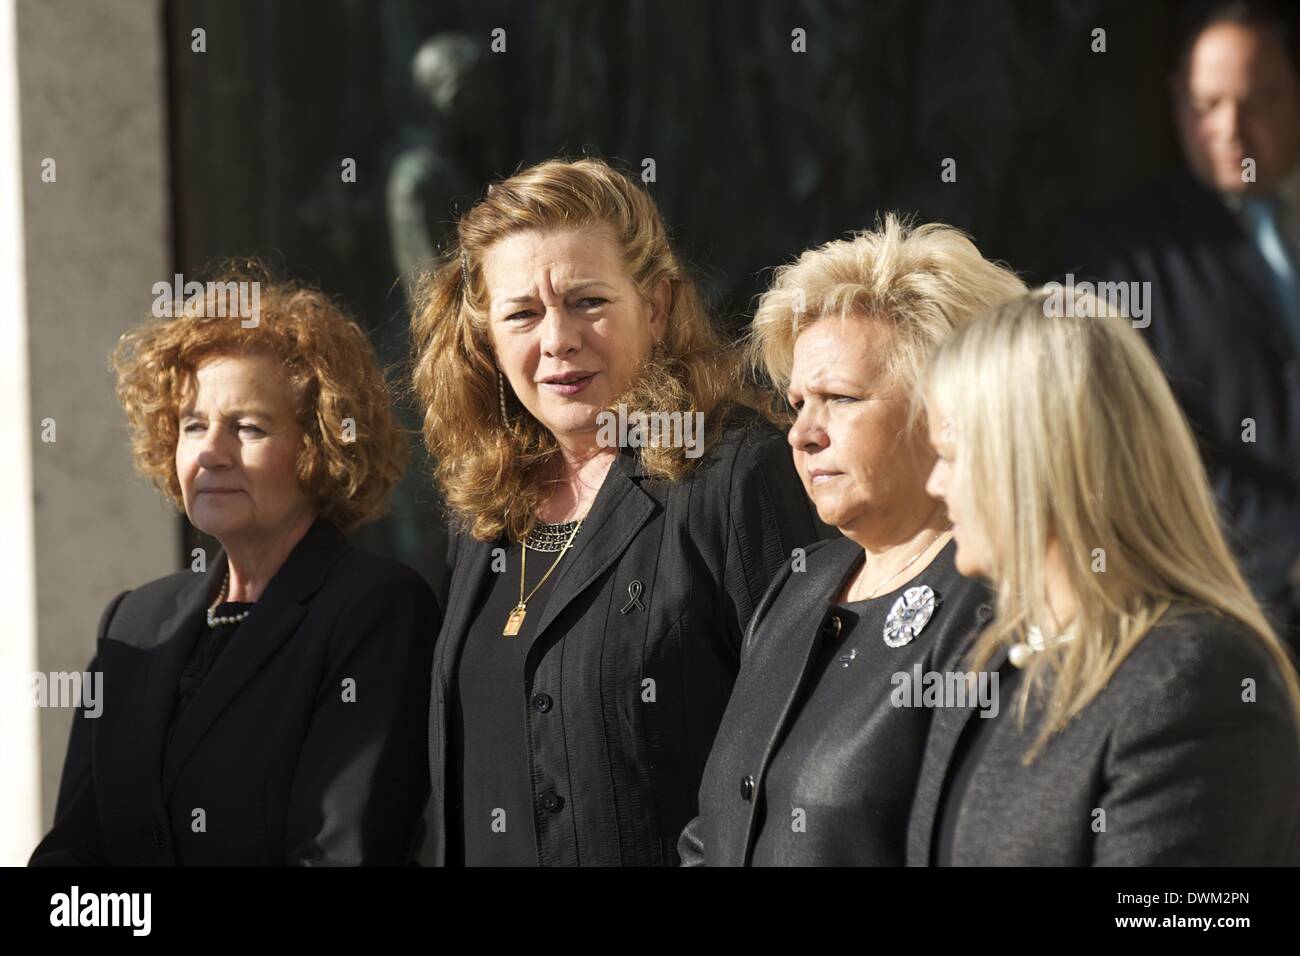 Madrid, Spain. 11th Mar, 2014. Angeles Dominguez, Pilar Manjon, Angeles Pedraza and Maria del Mar Blanco attend Solemn Mass honoring and remembering the victims of the 10th annivrsary of the terrorist attacks of March 11, 2004 at Almudena Cathedral on March 11, 2014 in Madrid Credit:  Jack Abuin/ZUMAPRESS.com/Alamy Live News Stock Photo